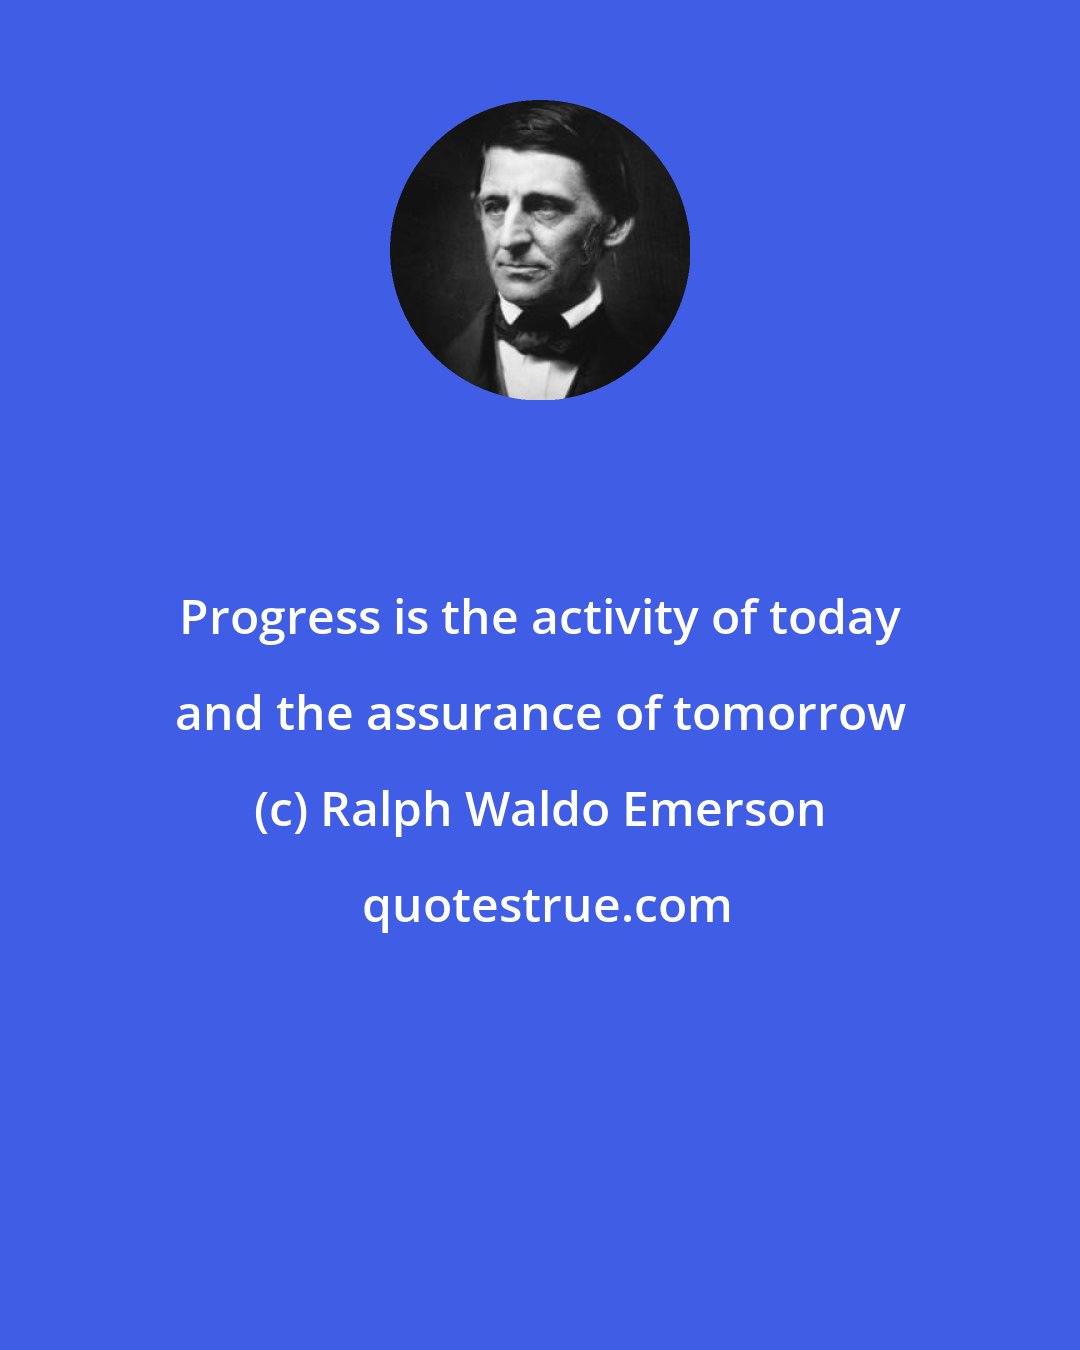 Ralph Waldo Emerson: Progress is the activity of today and the assurance of tomorrow